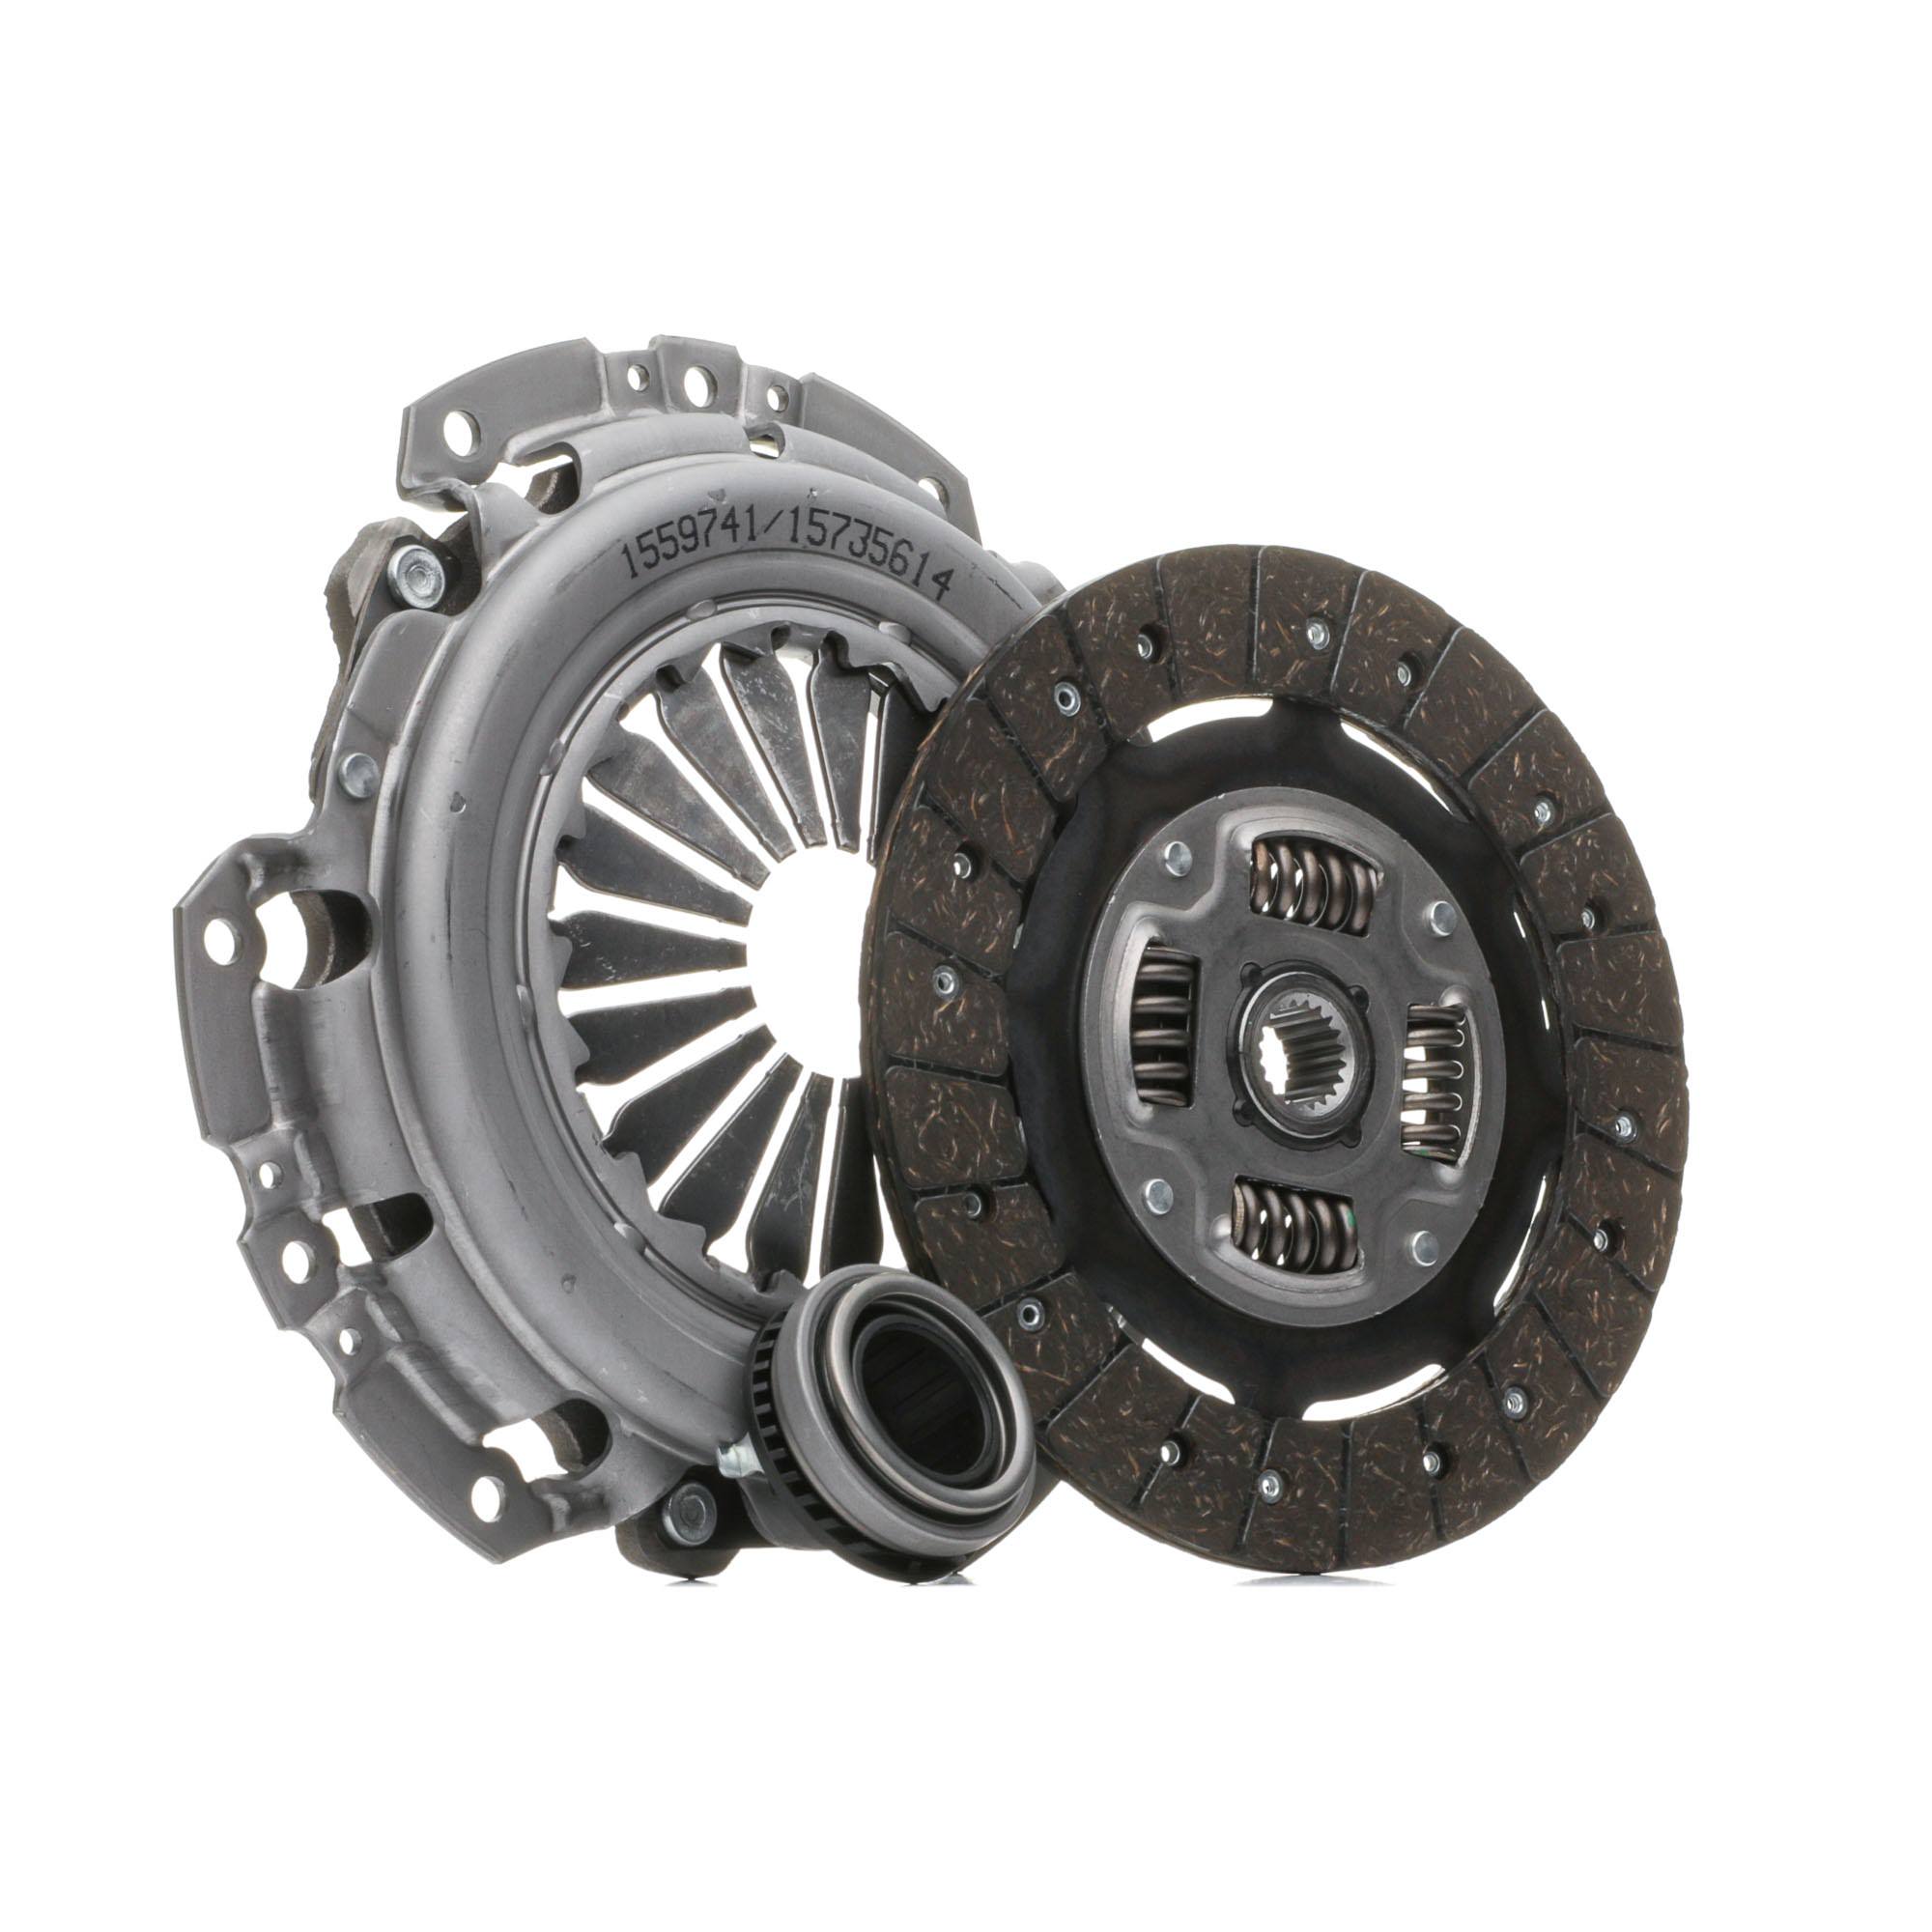 479C0768 RIDEX Clutch set KIA with clutch release bearing, with clutch disc, 220mm